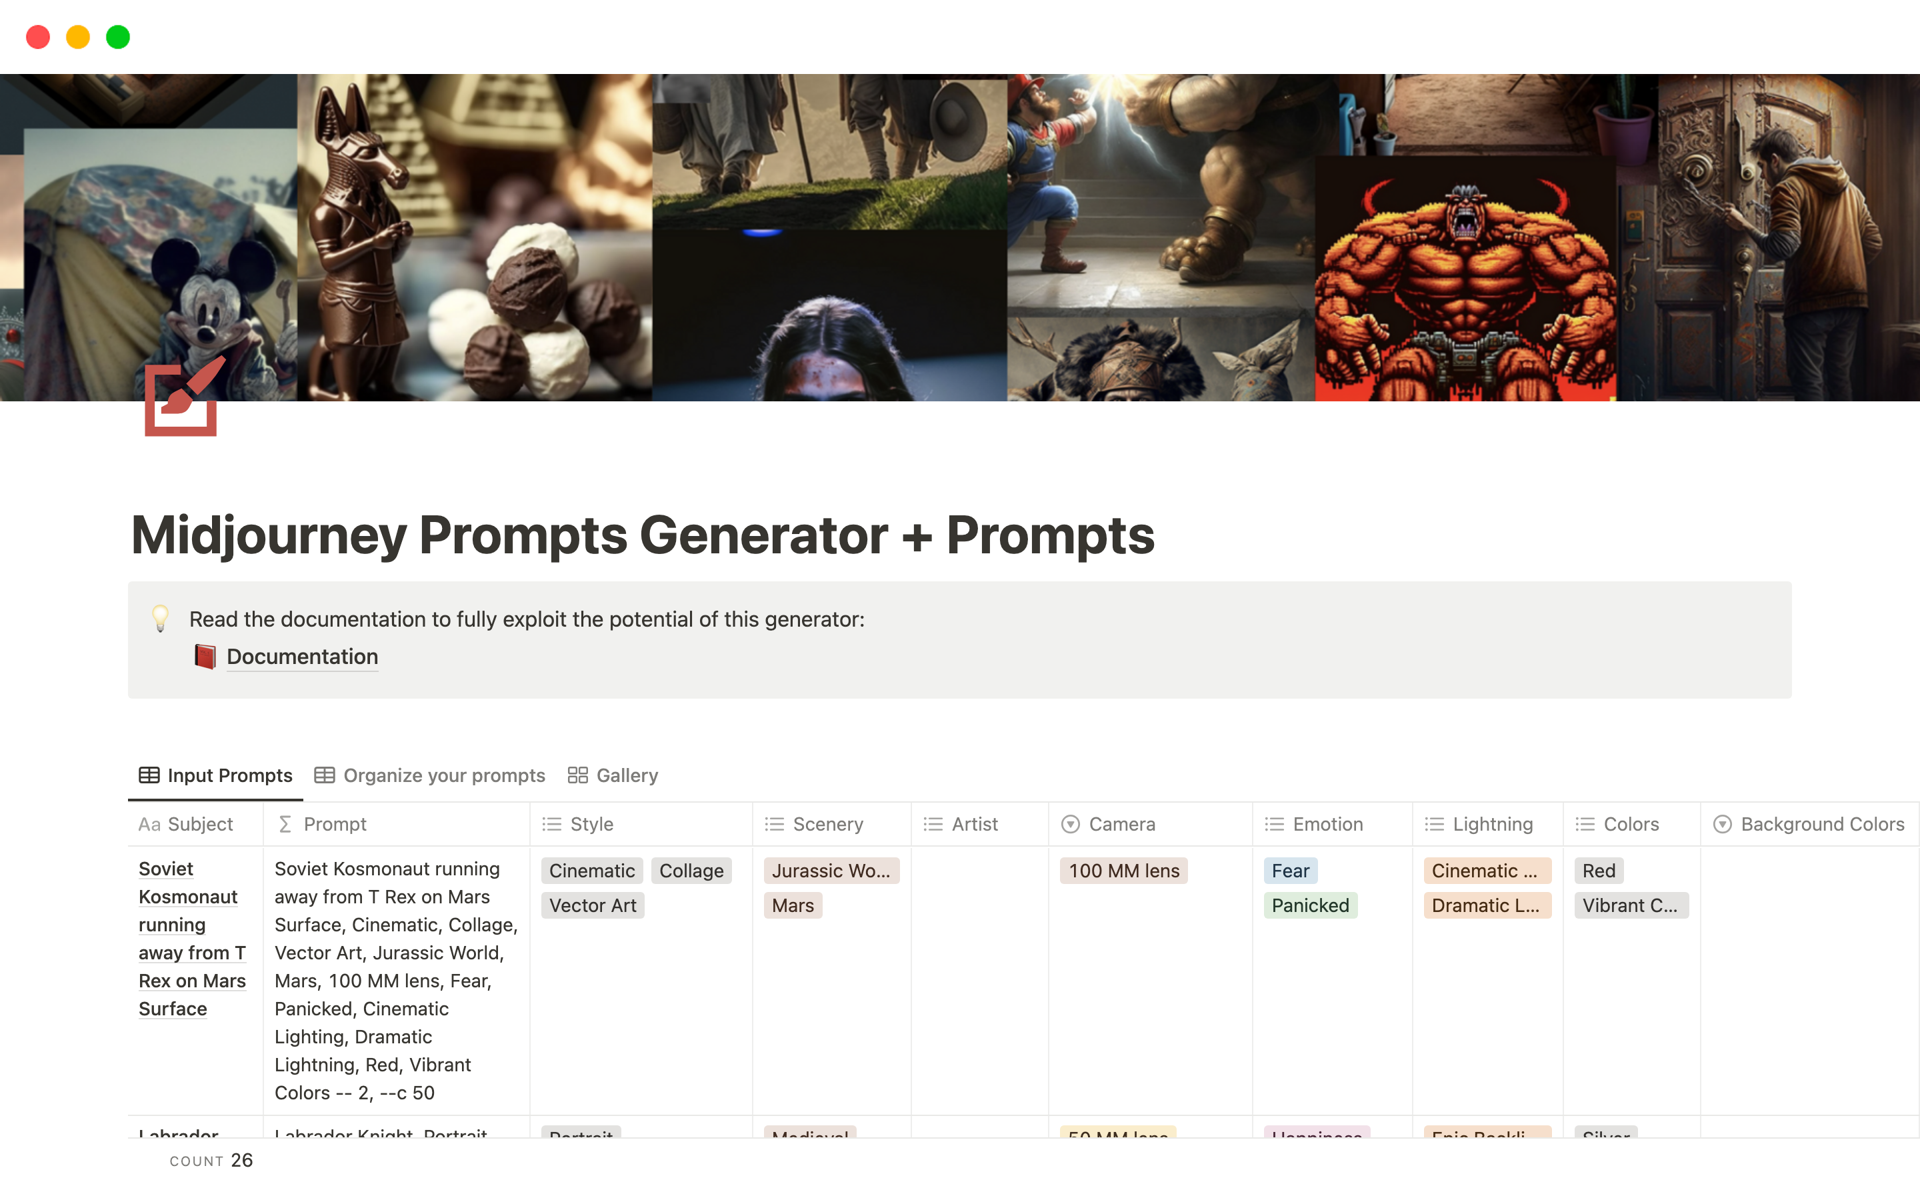 Upgrade your Midjourney experience with this Prompts Generator powered by Notion.